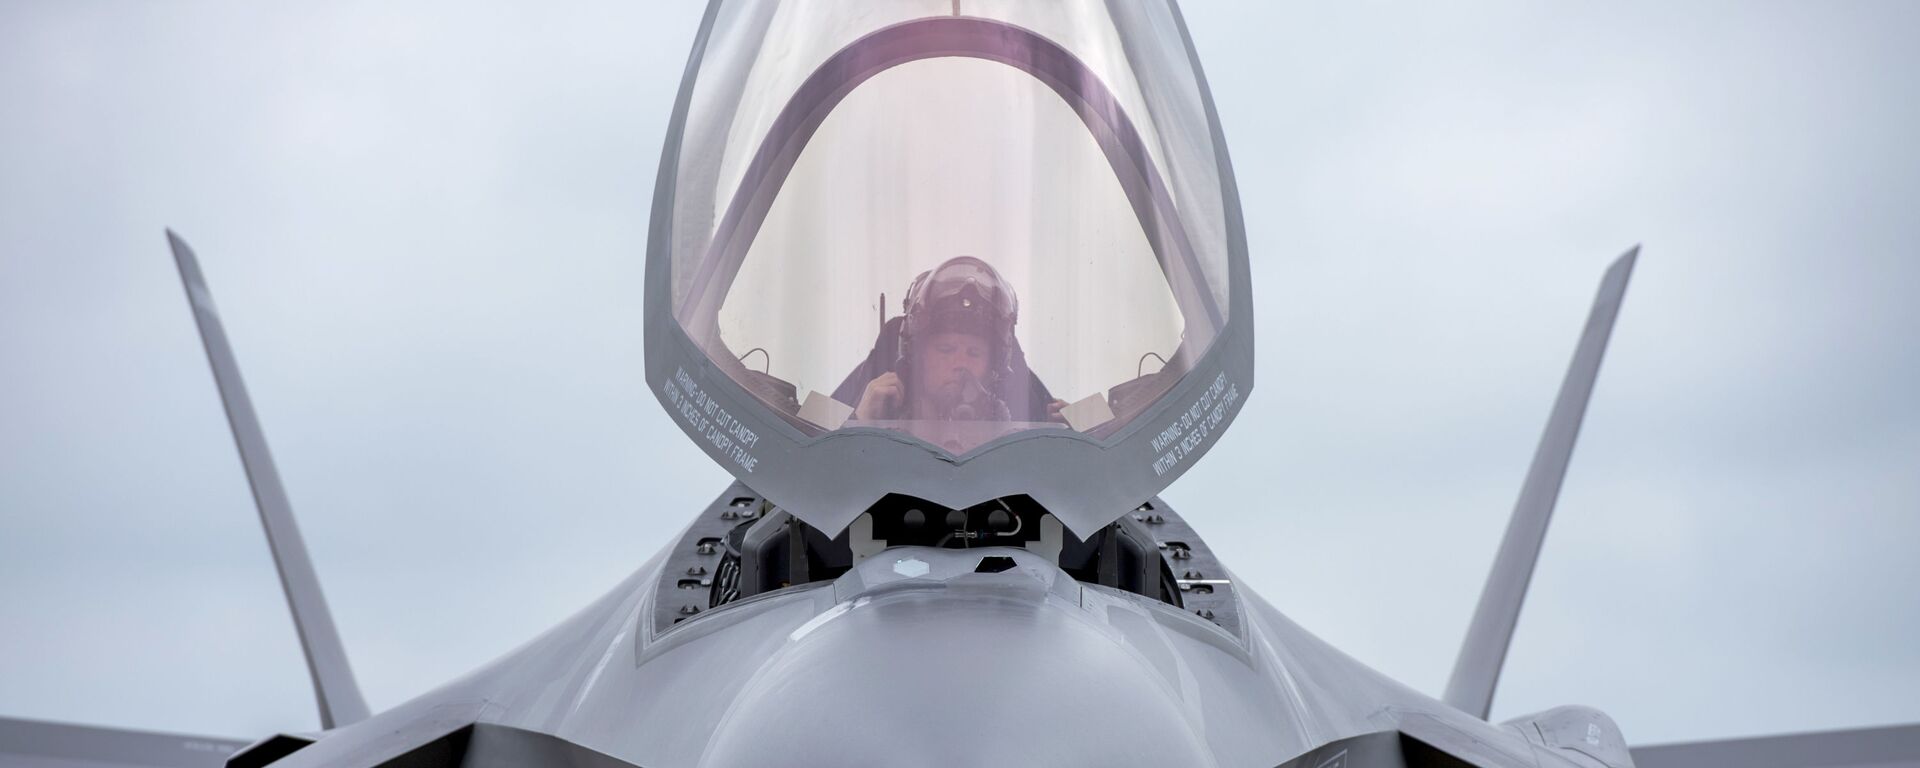 Maj. Will Andreotta, F-35 Lightning II Heritage Flight Team pilot from Luke Air Force Base, Az., prepares to exit the cockpit at Joint Base Andrews, Md., Sept. 20, 2016. The aircraft is here to perform a fly-over during the U.S. Air Force Tattoo at Joint Base Anacostia-Bolling, Washington, D.C., Sept. 22, 2016.  - Sputnik International, 1920, 13.12.2023